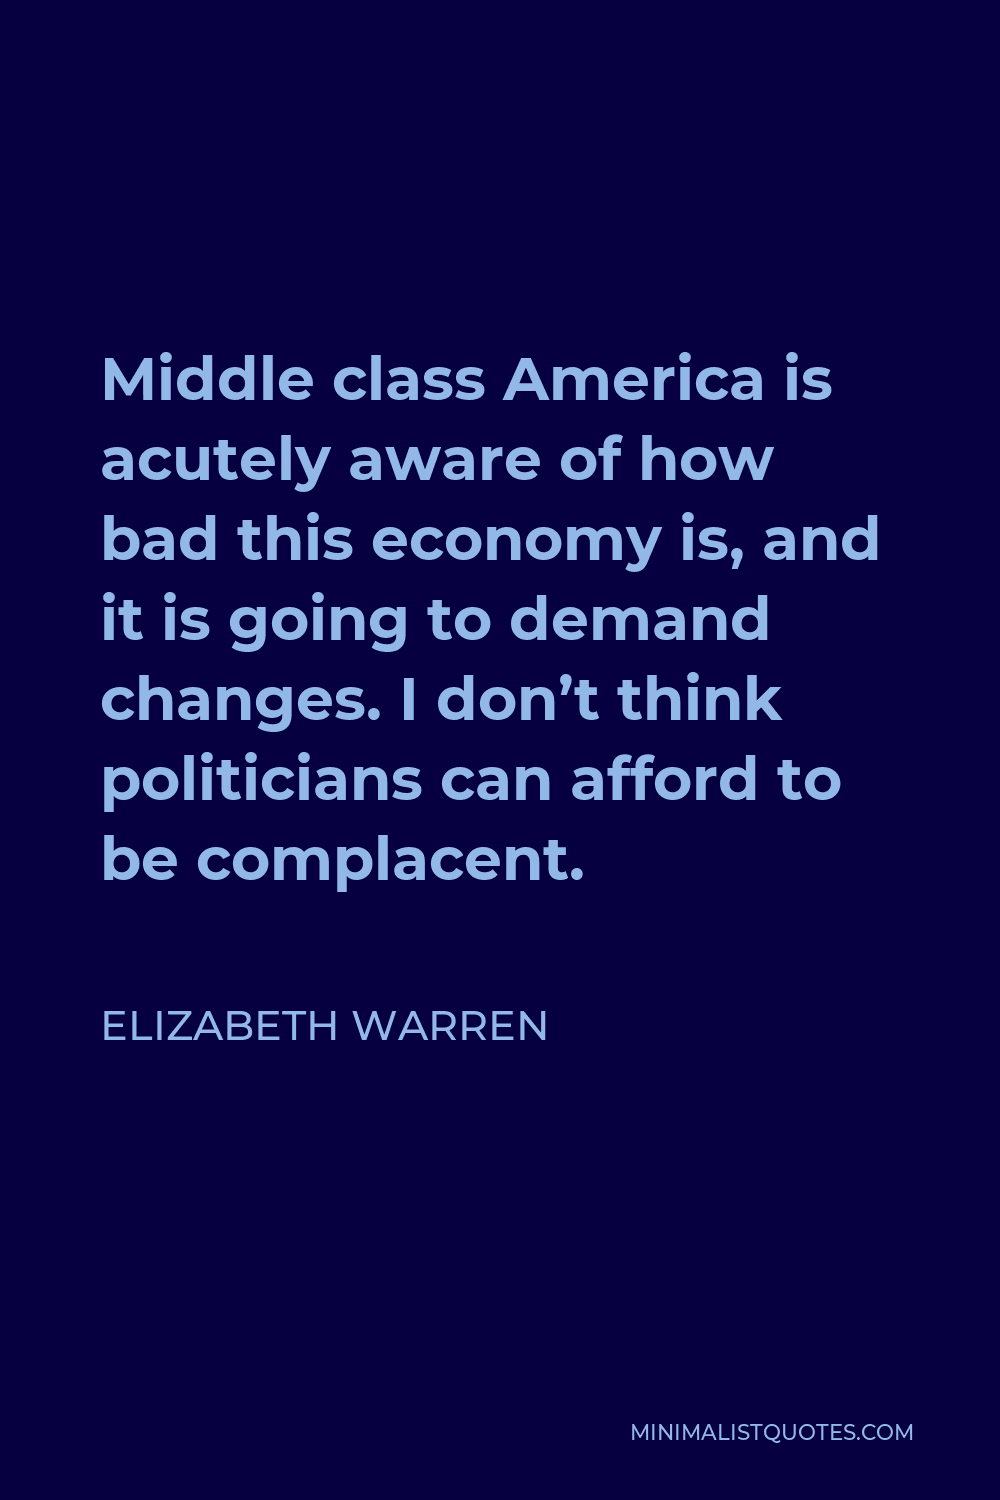 Elizabeth Warren Quote - Middle class America is acutely aware of how bad this economy is, and it is going to demand changes. I don’t think politicians can afford to be complacent.